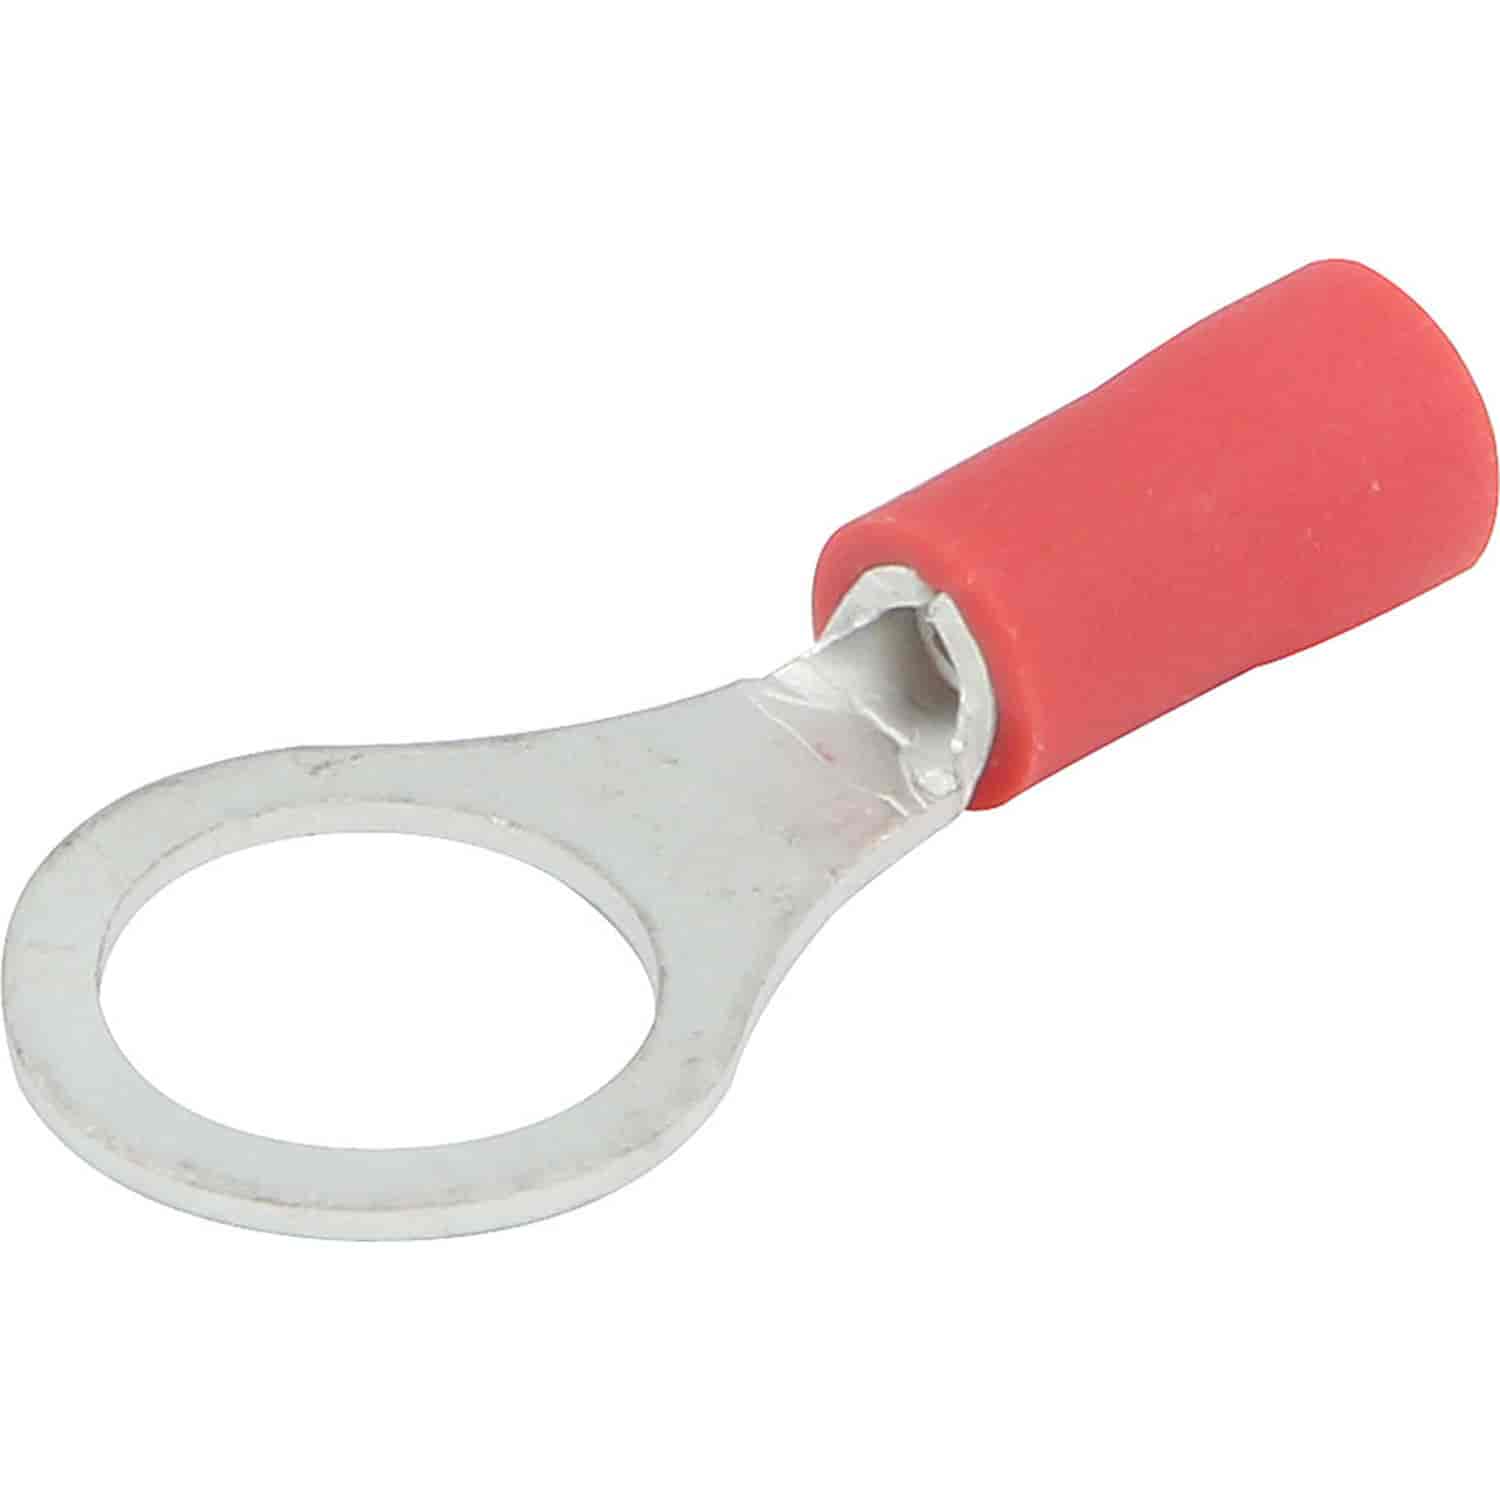 5/16" Hole Ring Terminals Vinyl Insulated